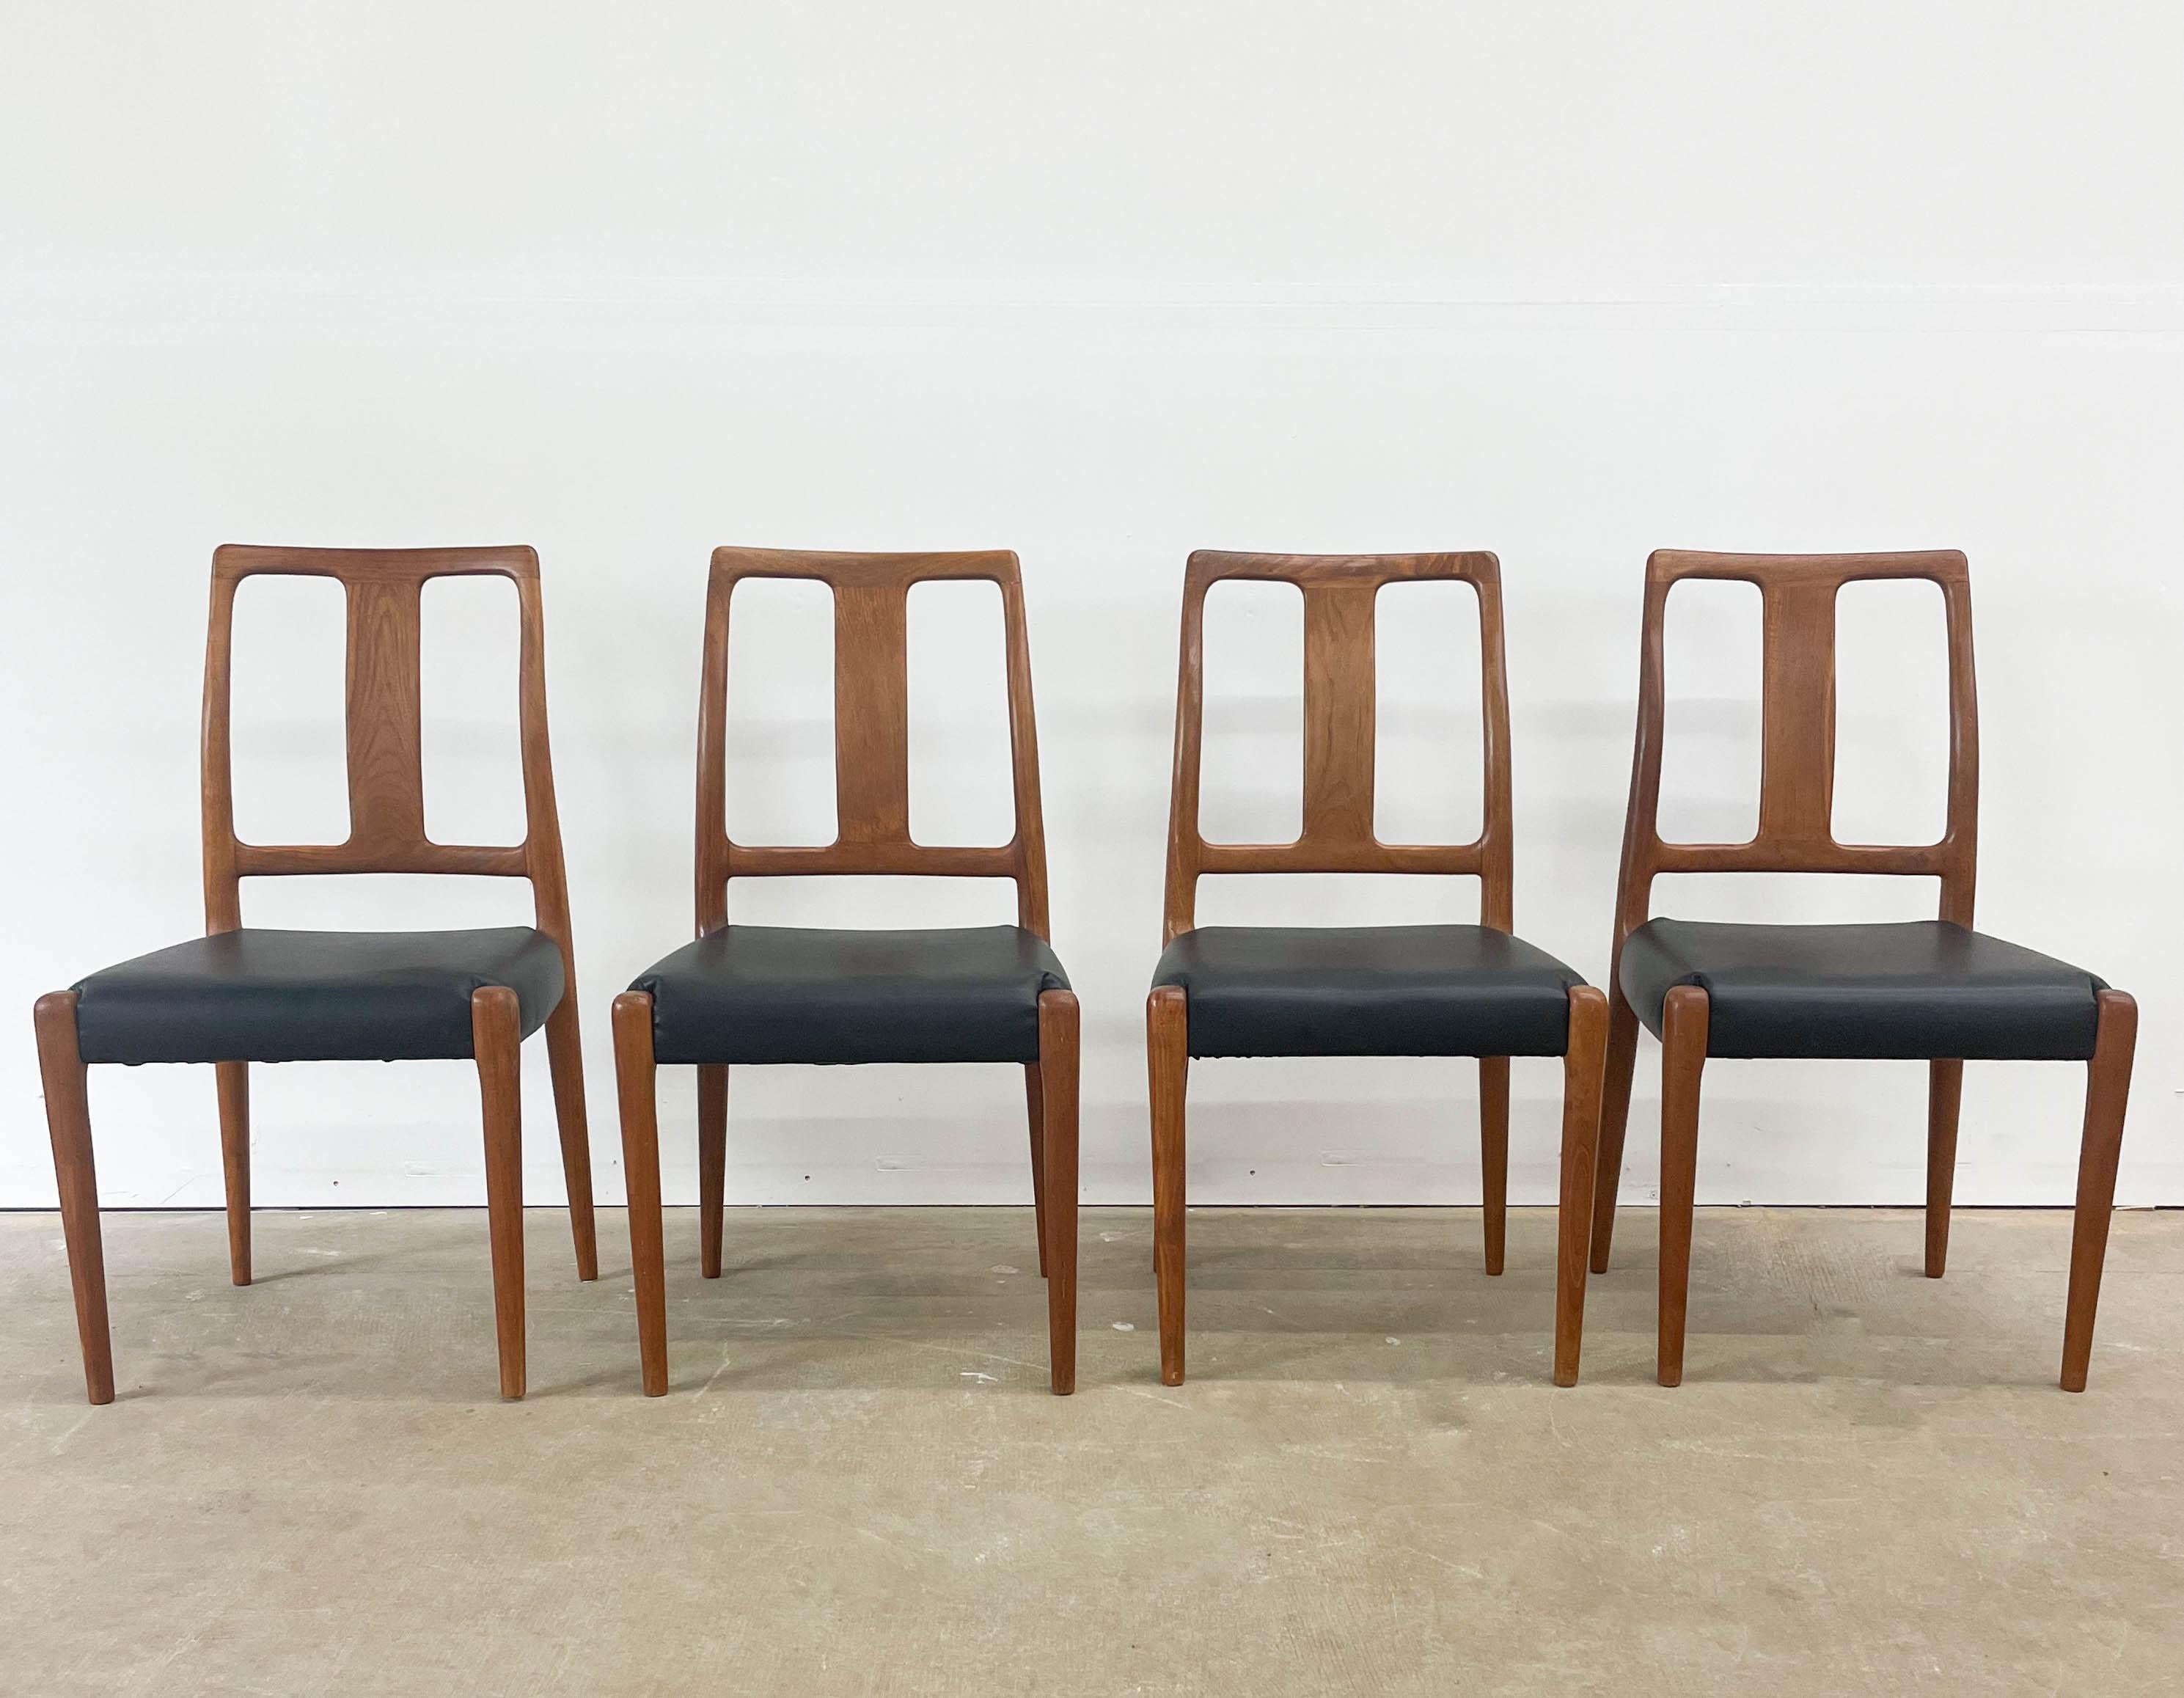 20th Century D-Scan Teak Dining Chairs